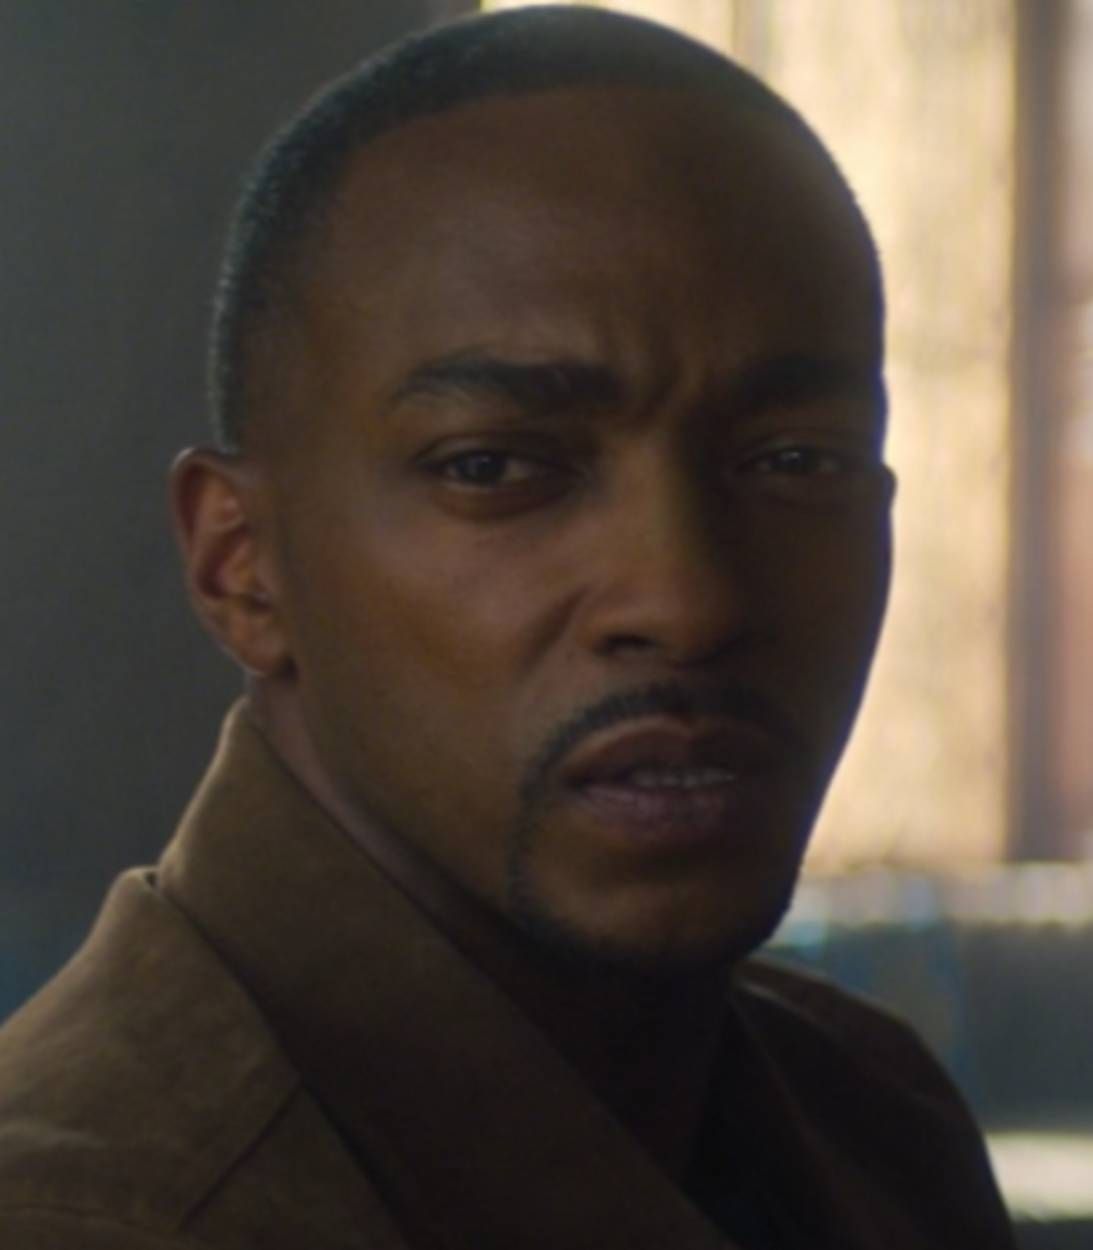 Sam Wilson pic The Falcon and the Winter Soldier pic vertical